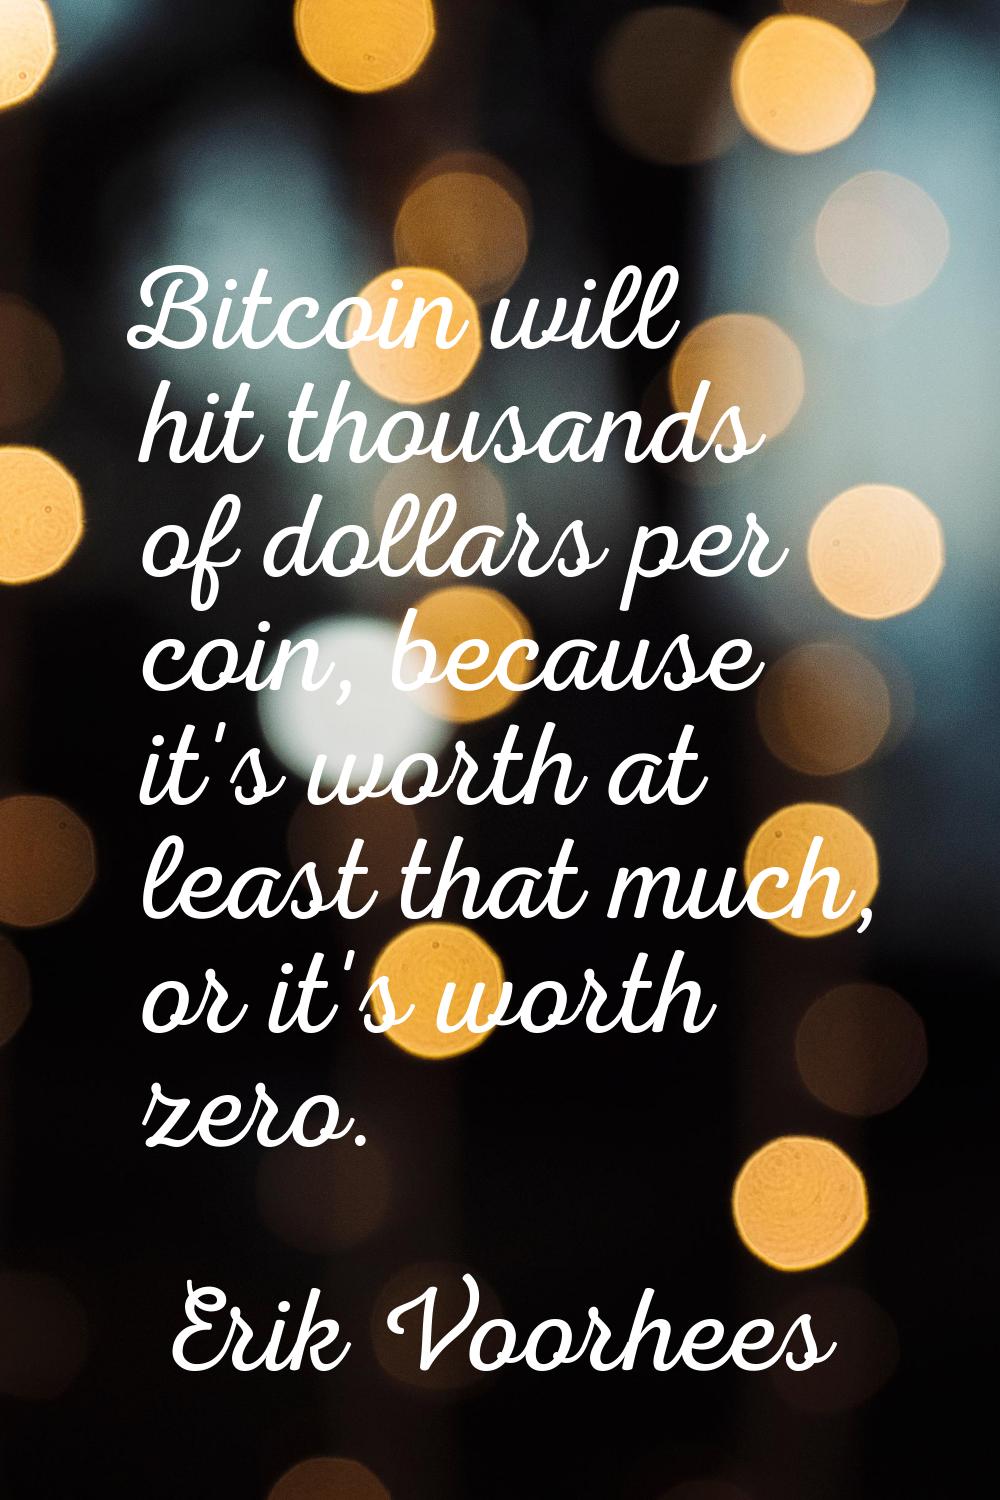 Bitcoin will hit thousands of dollars per coin, because it's worth at least that much, or it's wort